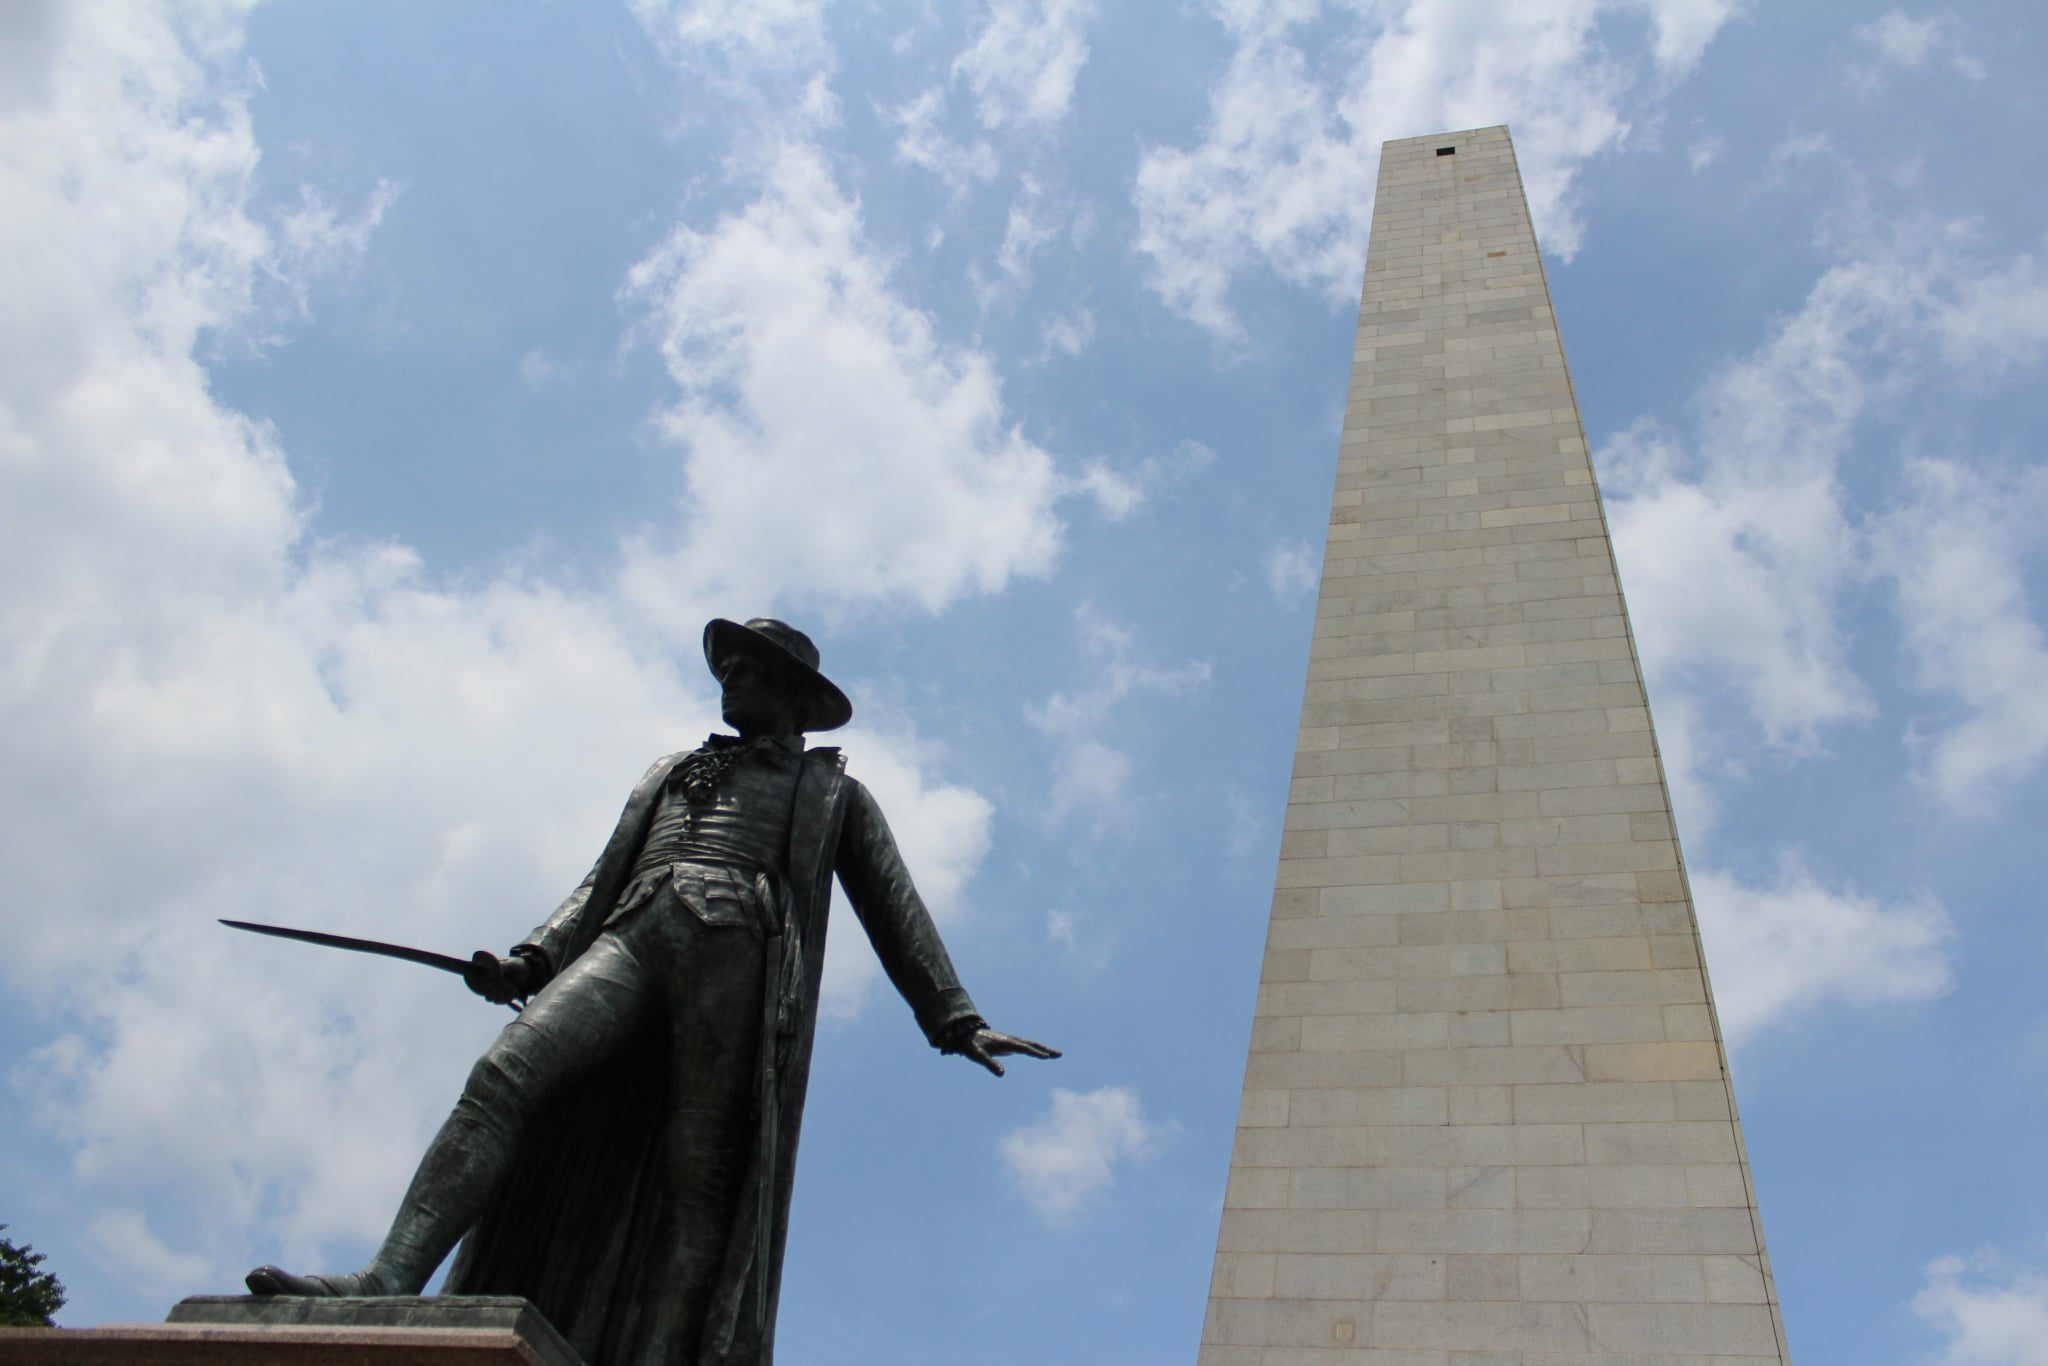 A statue of a man with a coat and hat on a cloudy day in front of a tall white-brick obelisk.